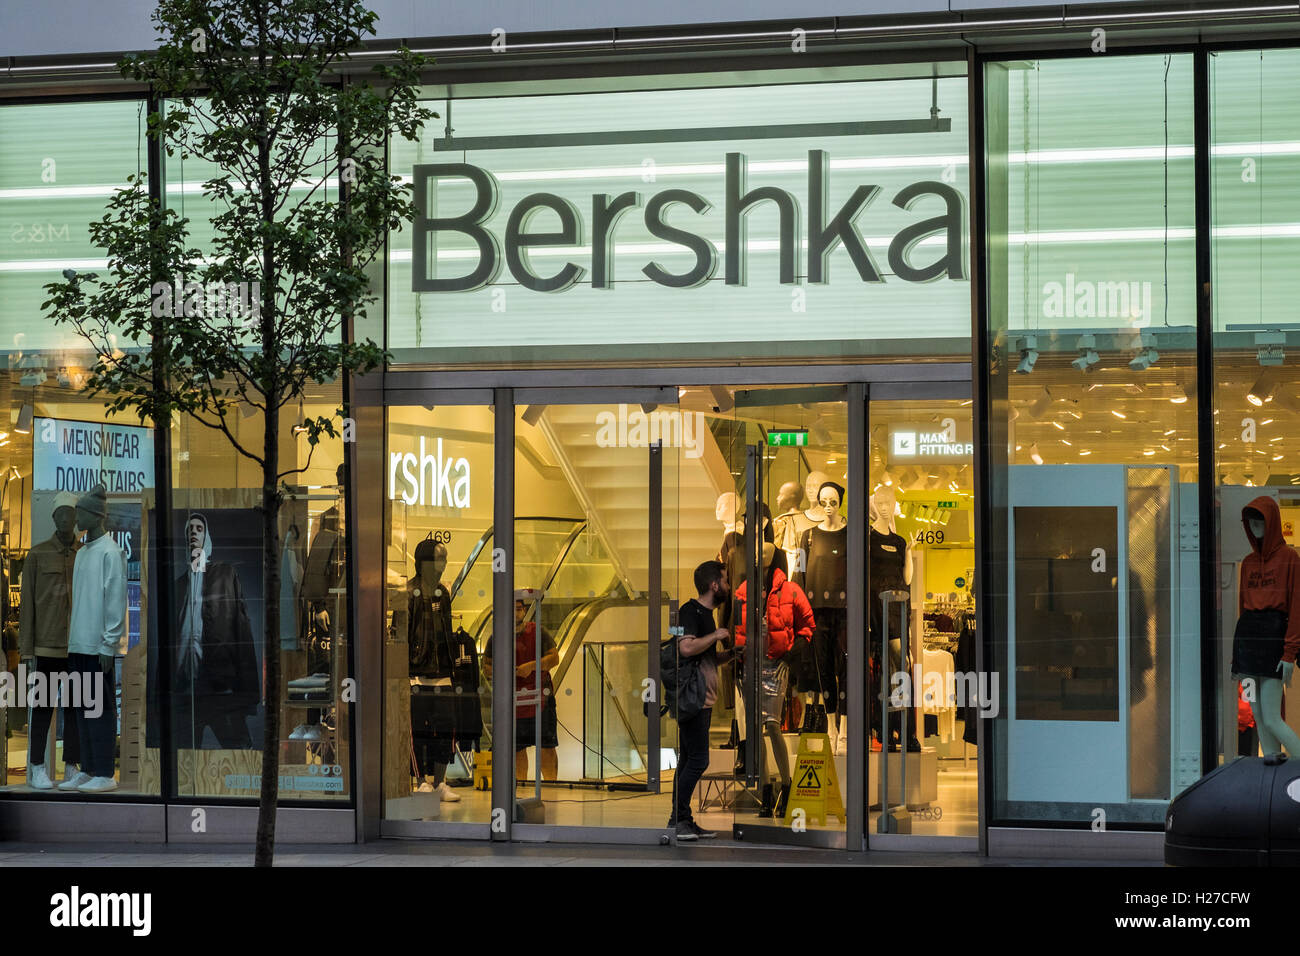 Bershka Oxford Street High Resolution Stock Photography and Images - Alamy